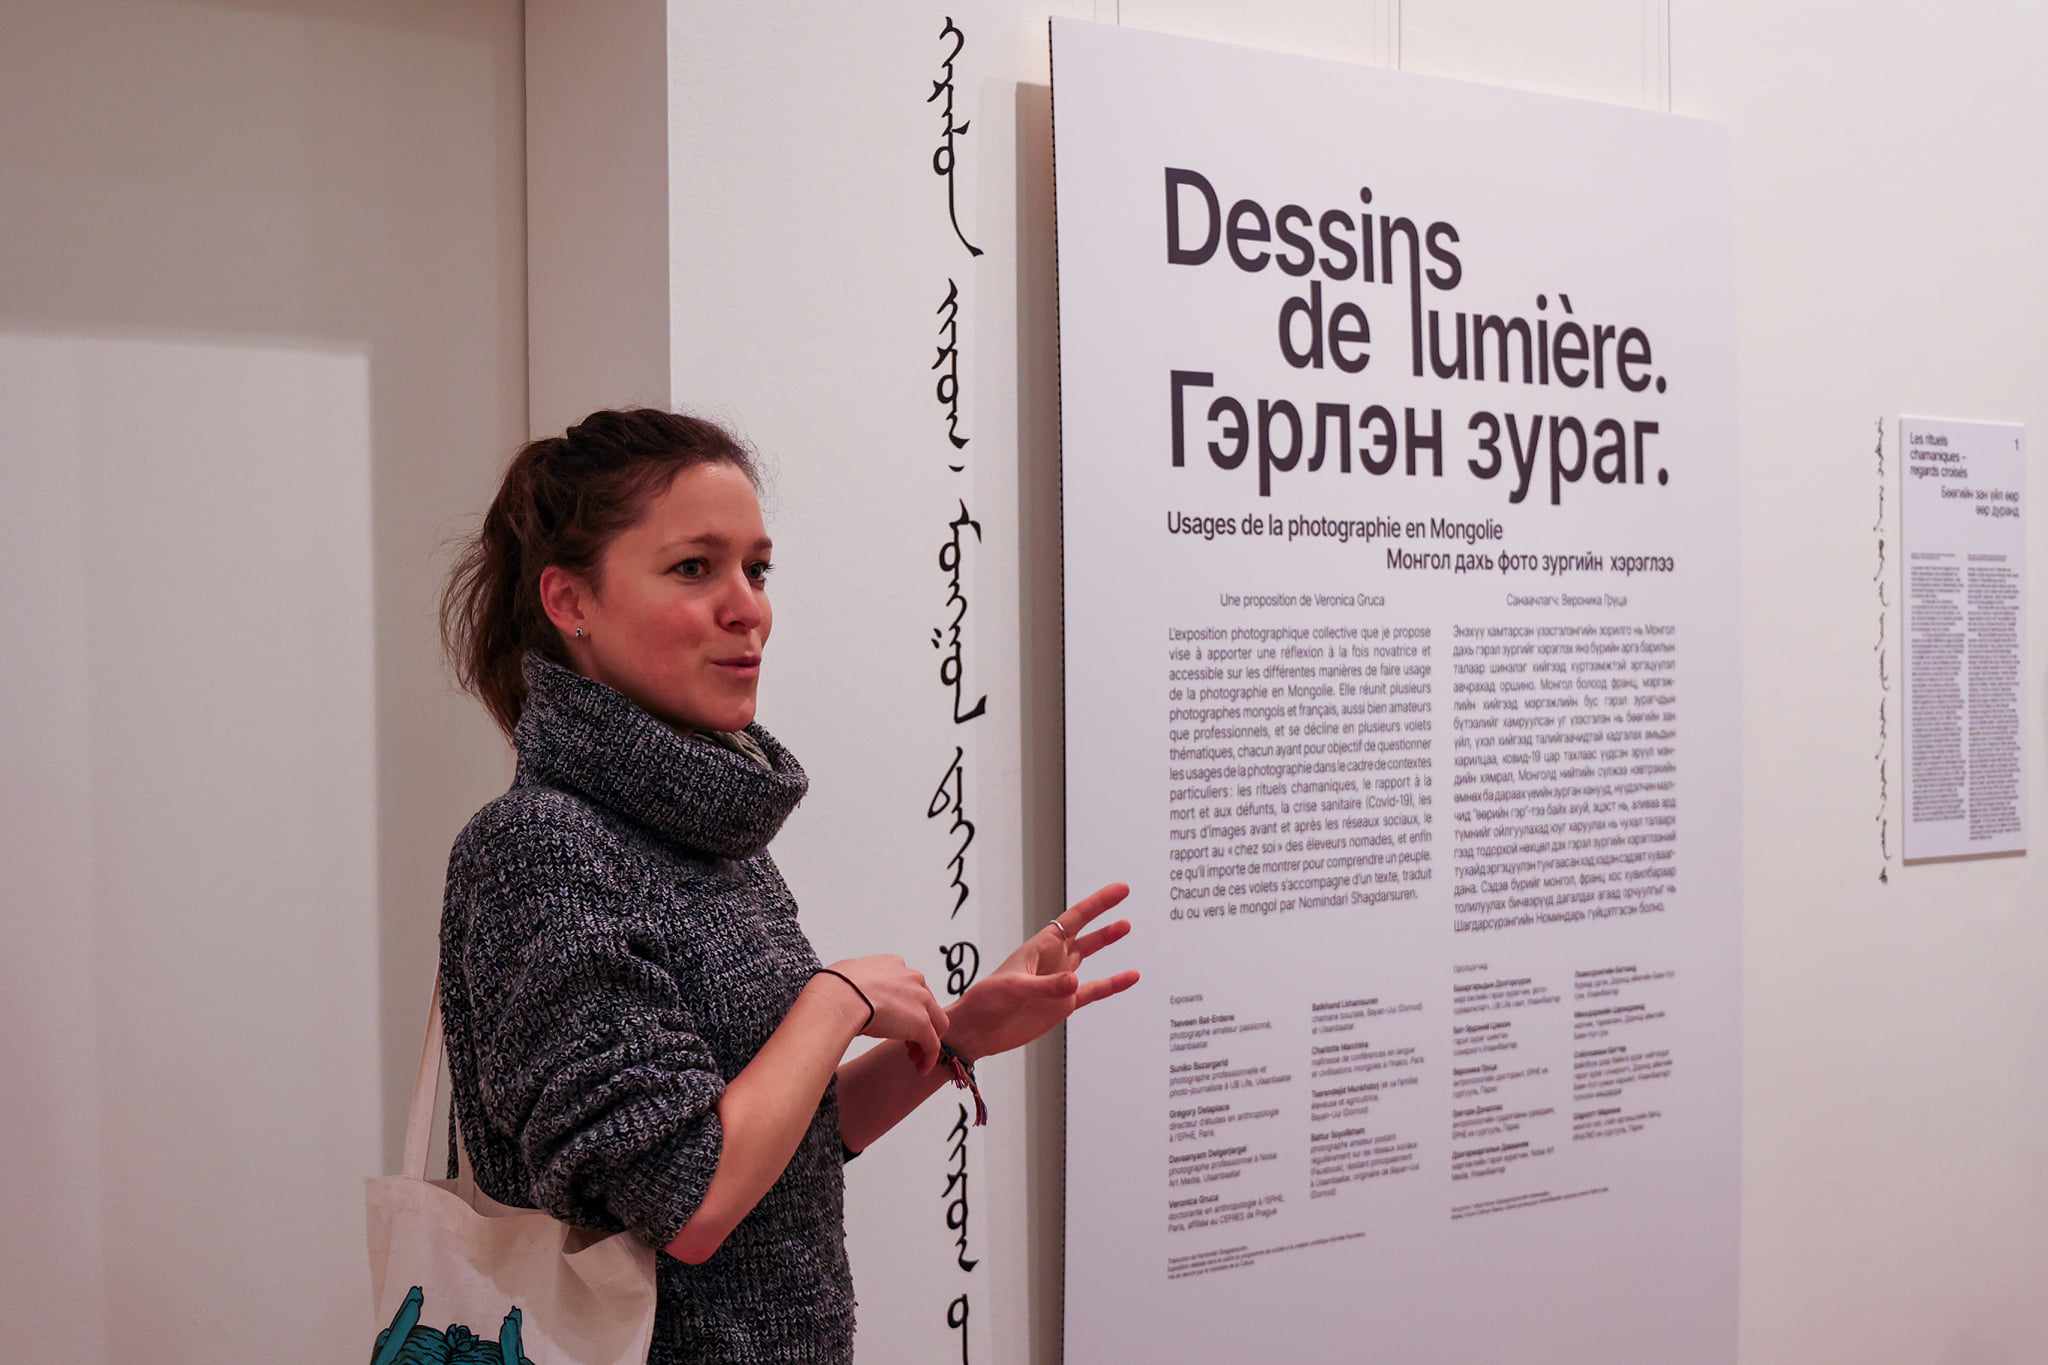 VERONICA GRUCA: I wanted to highlight Mongolian perspective in my exhibition